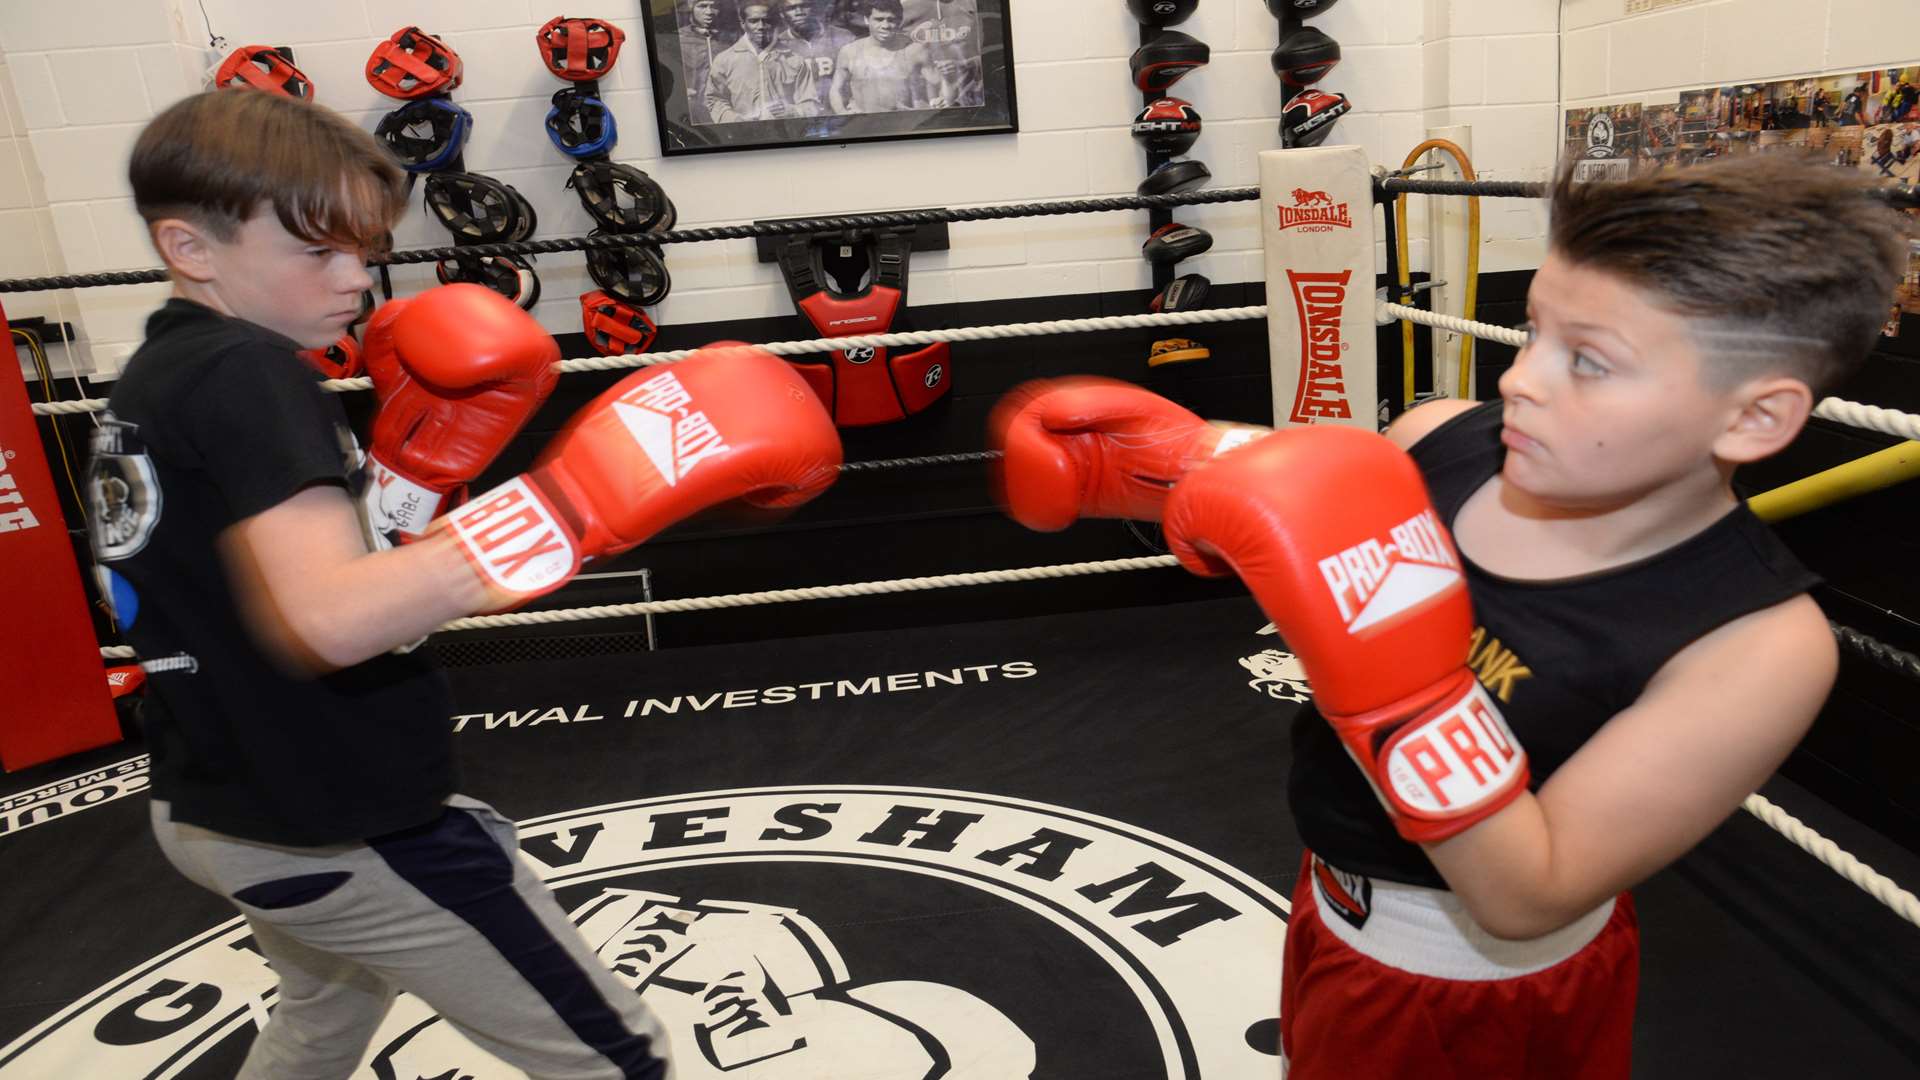 Aaron Issac, 13, and Levi Brazil, 10, sparing in the ring